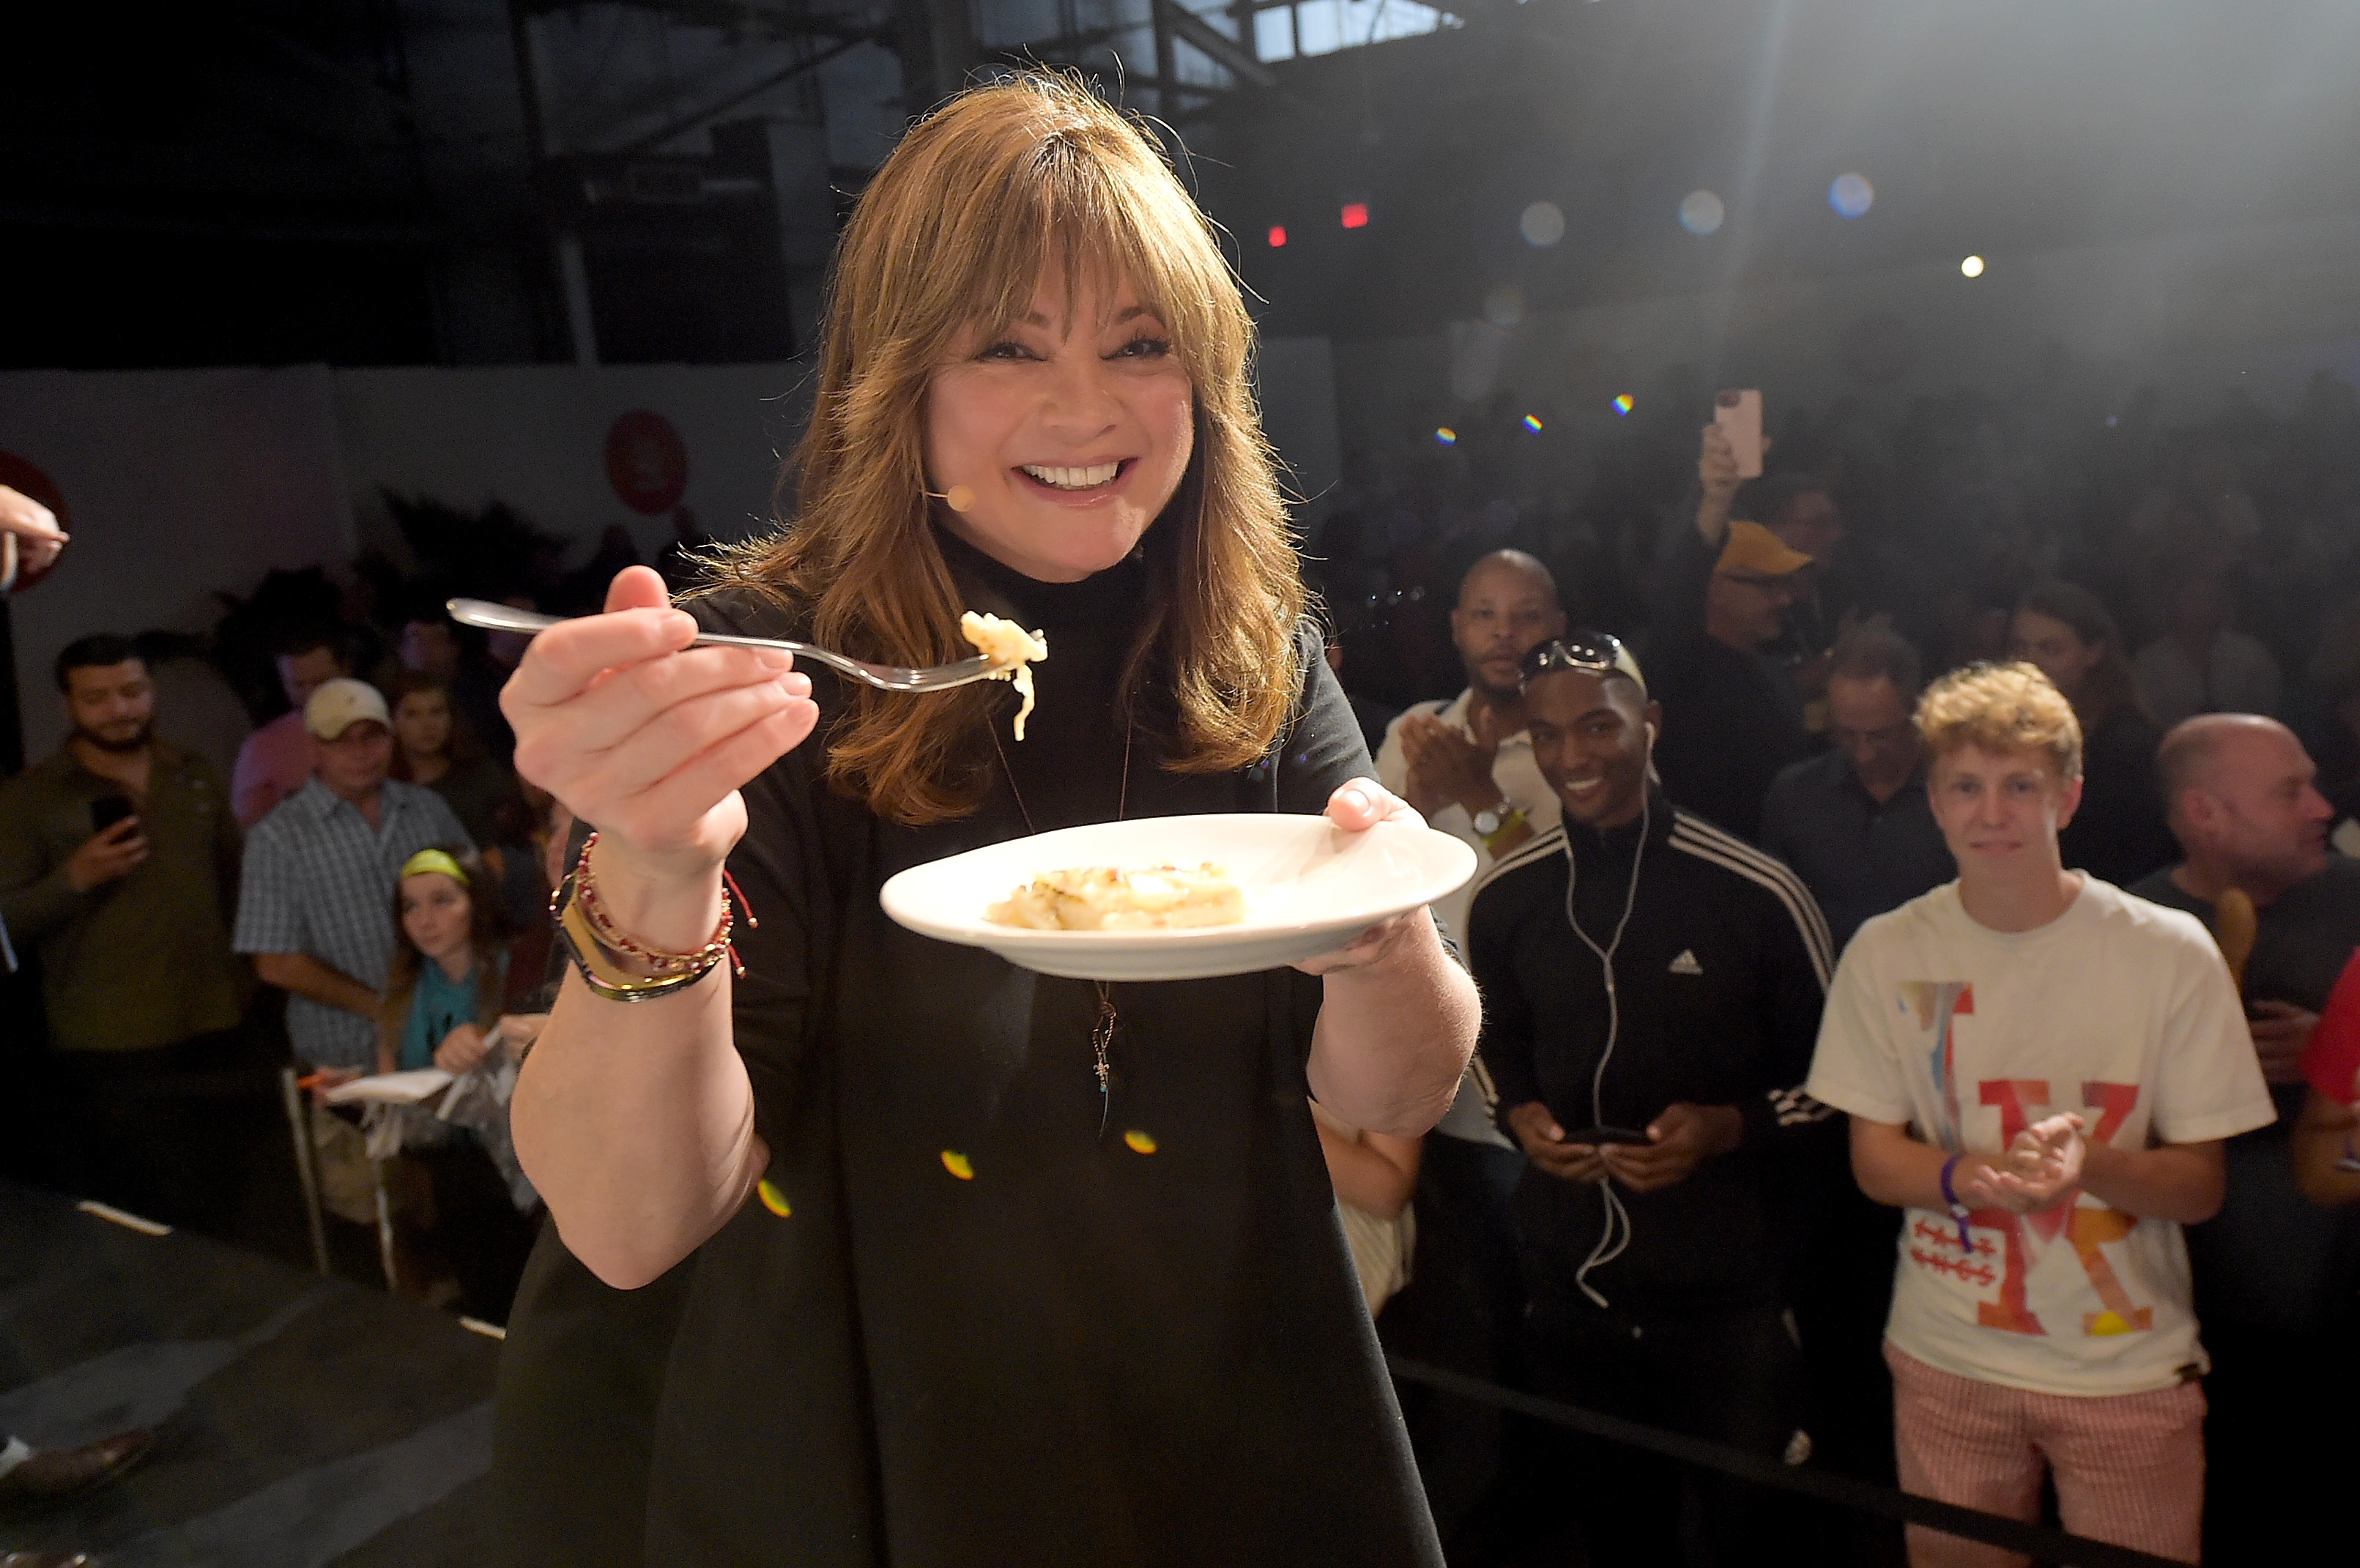 Food Network personality Valerie Bertinelli is photographed wearing a black turtleneck blouse.